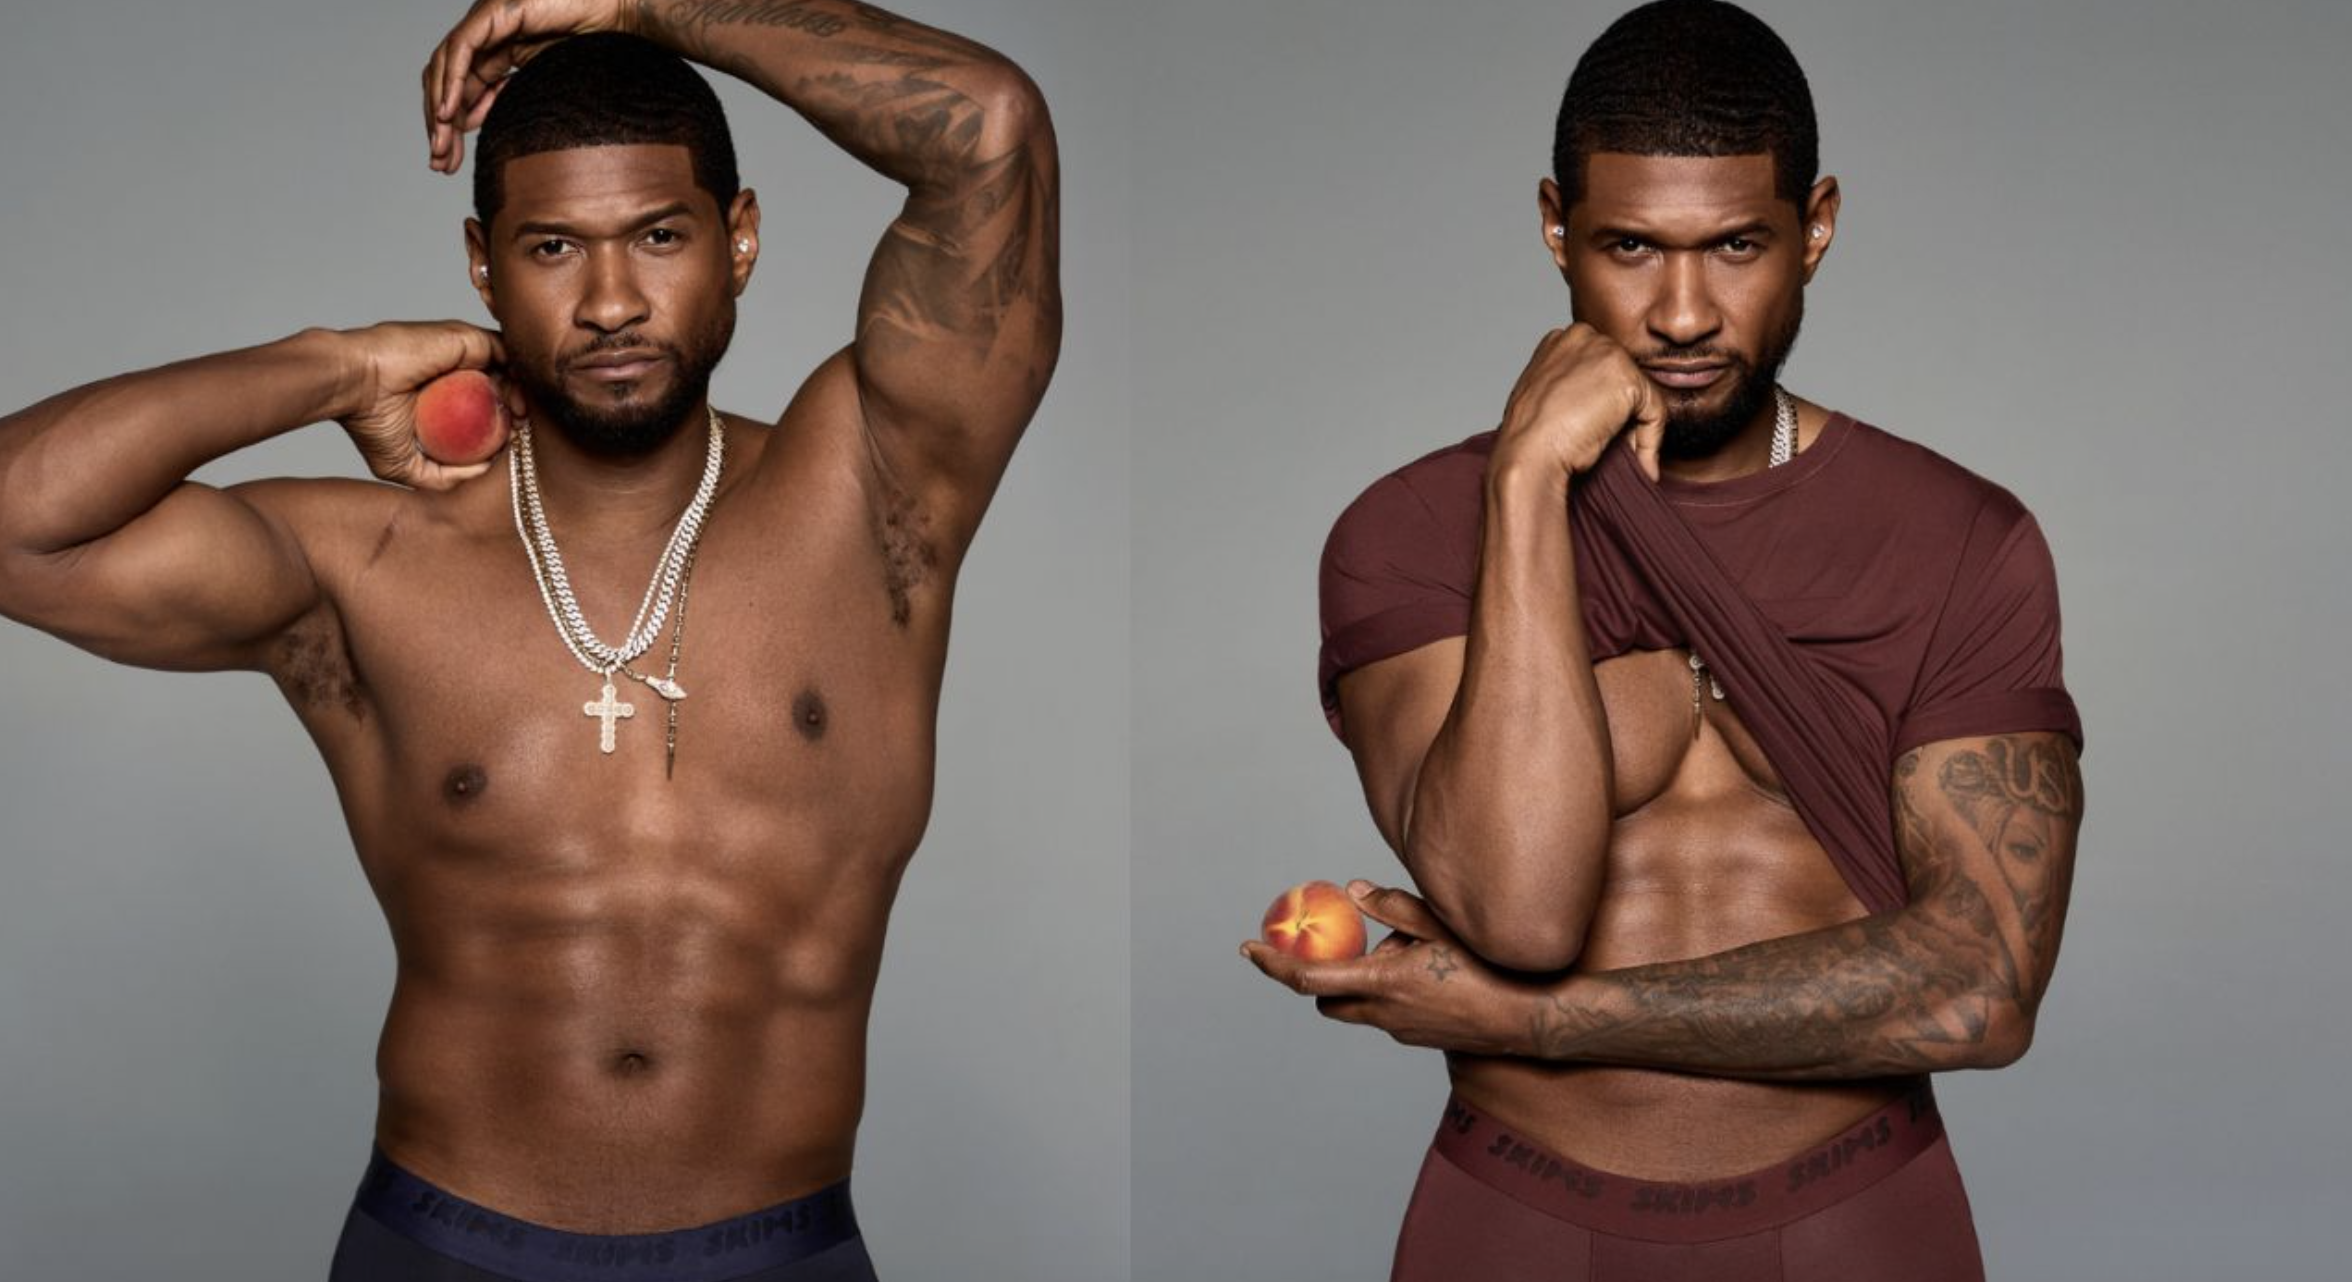 Usher Shows Off His Famous Abs As The New Face Of SKIMS: ‘Feels Like A Full Circle Moment’